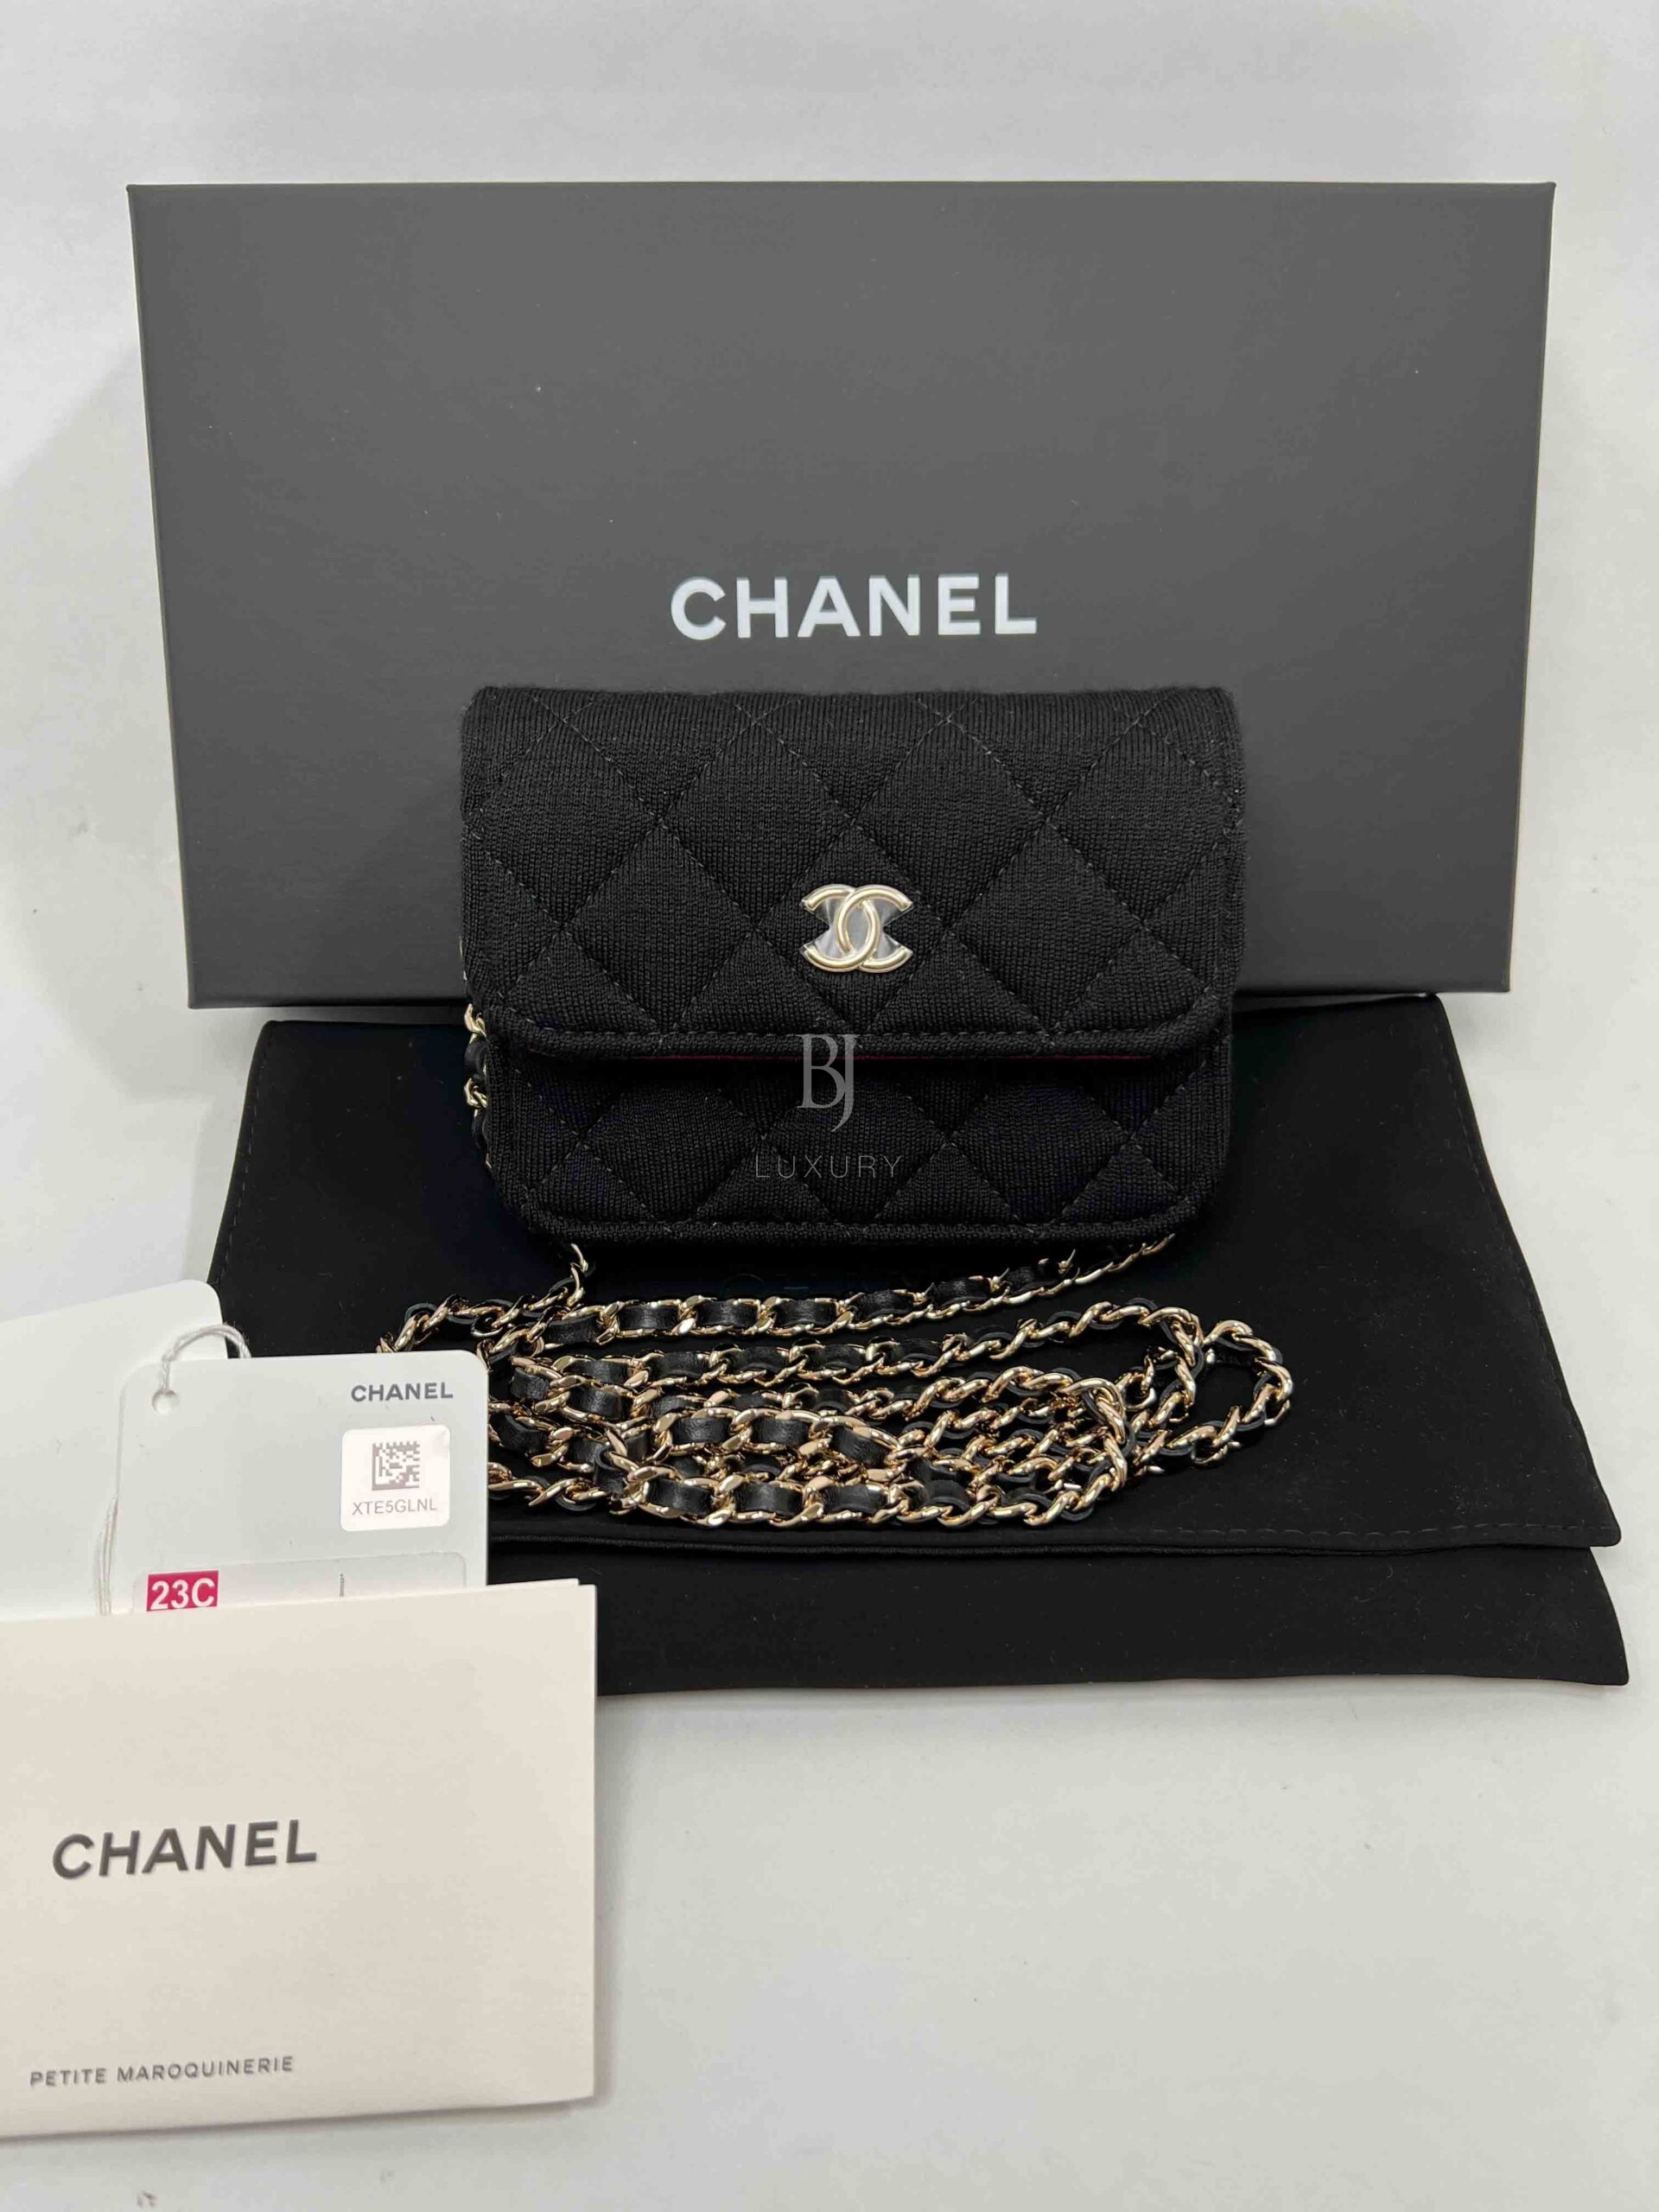 CHANEL-CLUTCHWITHCHAIN-MICROMINI-BLACK-JERSEY-Photo 23-2-23, 11 09 13.jpg